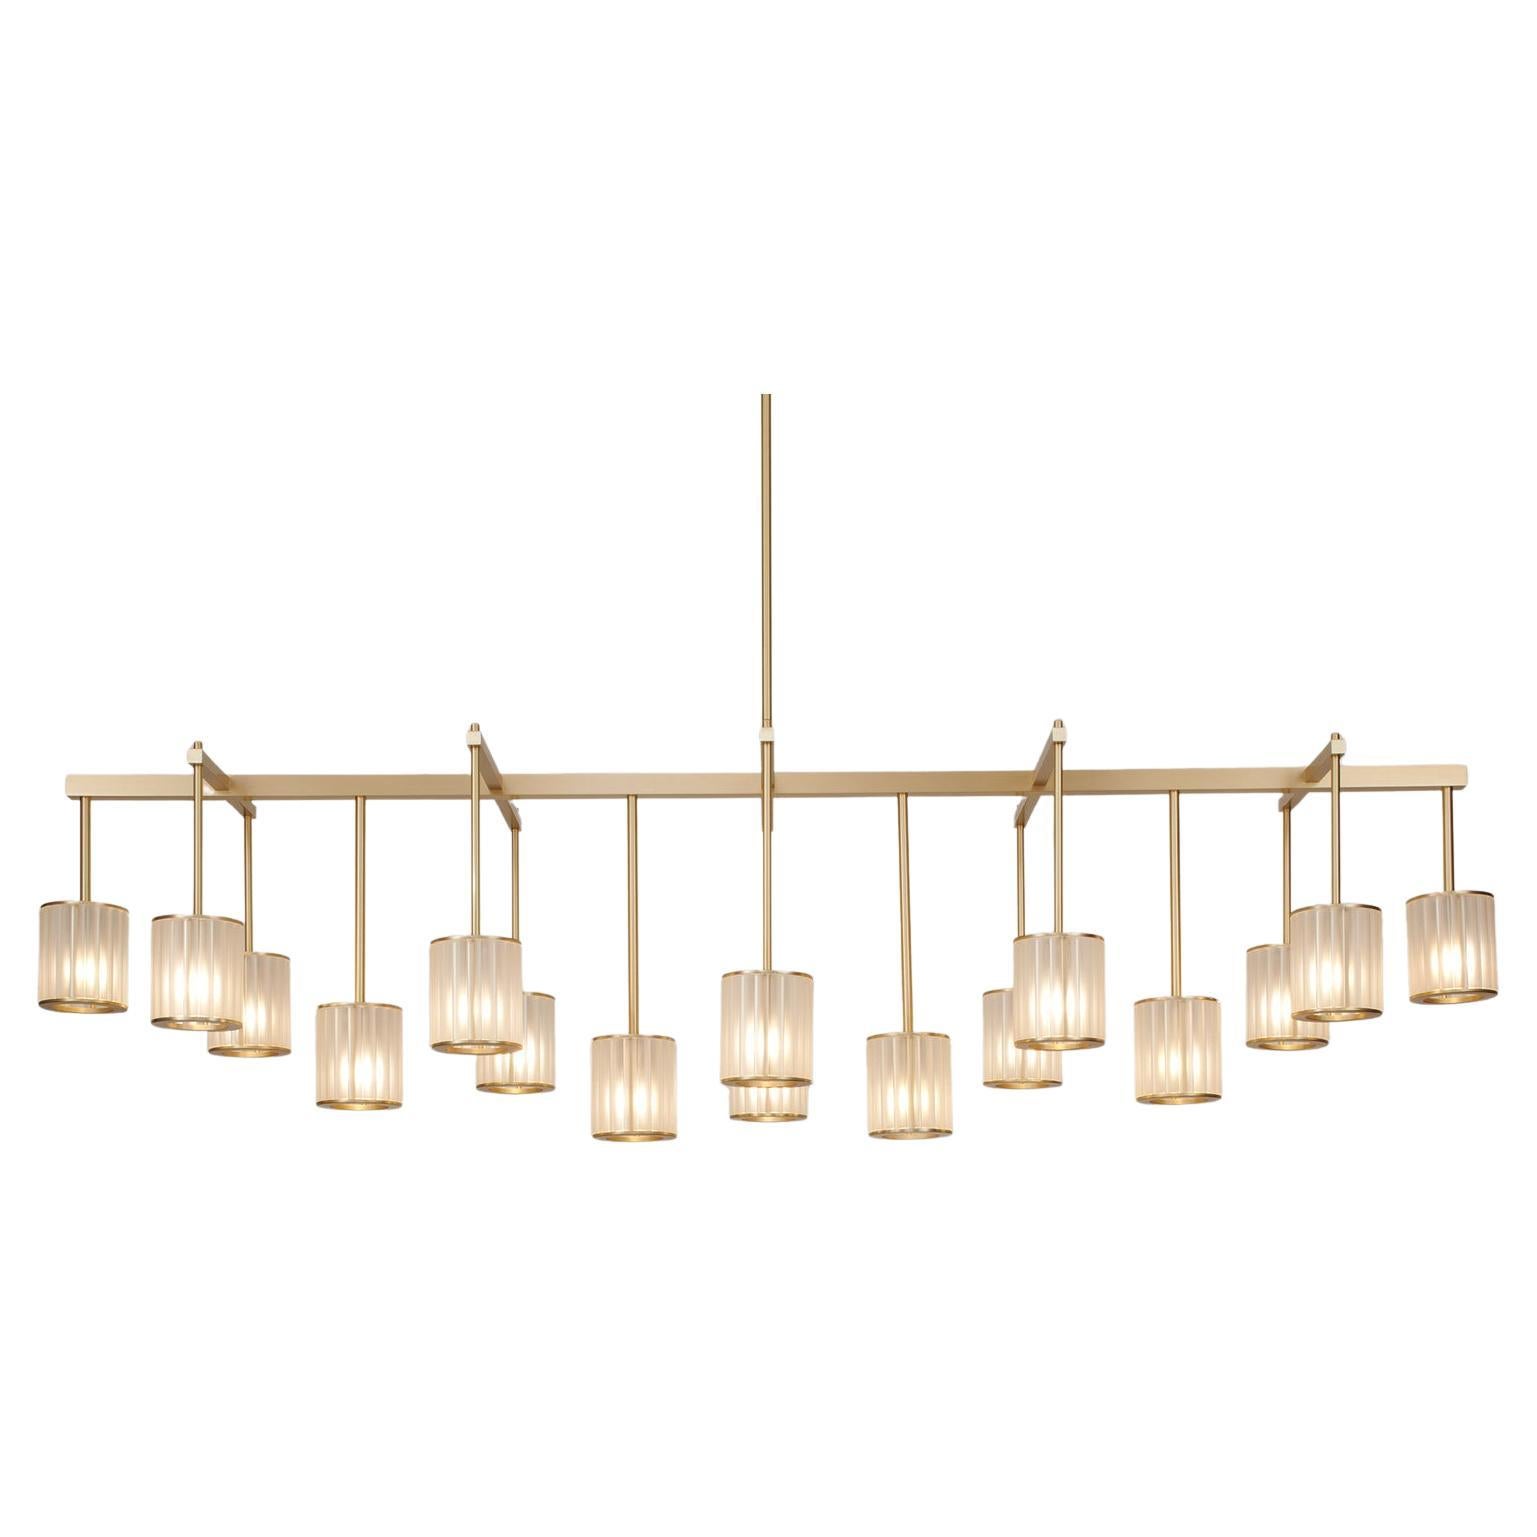 Flute Beam Chandelier with 16 Arms in Brushed Brass and Frosted Glass Diffusers For Sale